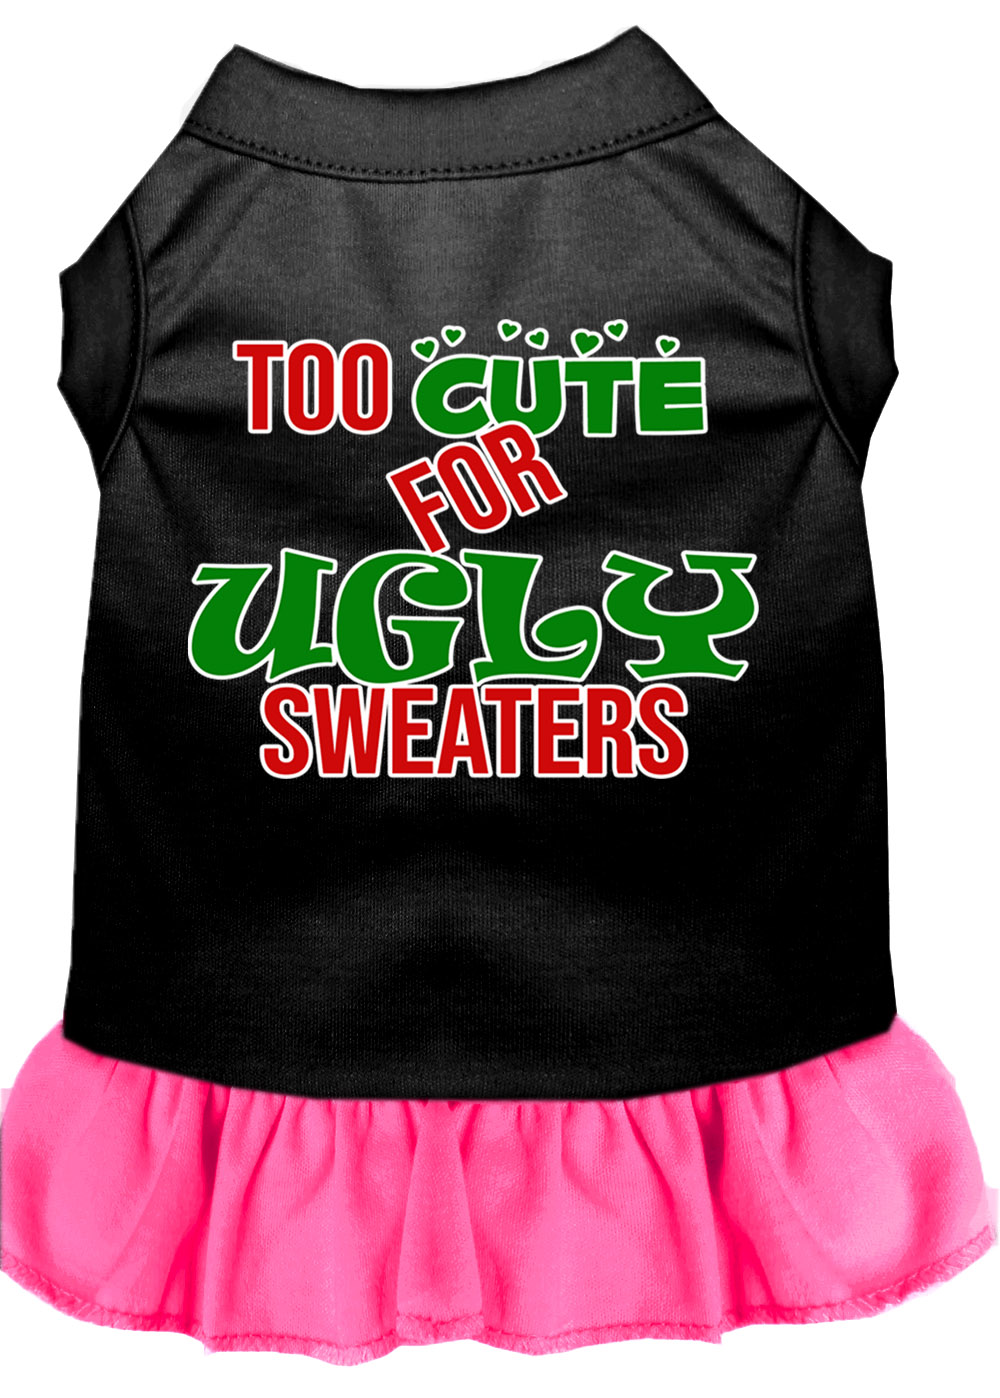 Too Cute for Ugly Sweaters Screen Print Dog Dress Black with Bright Pink Sm